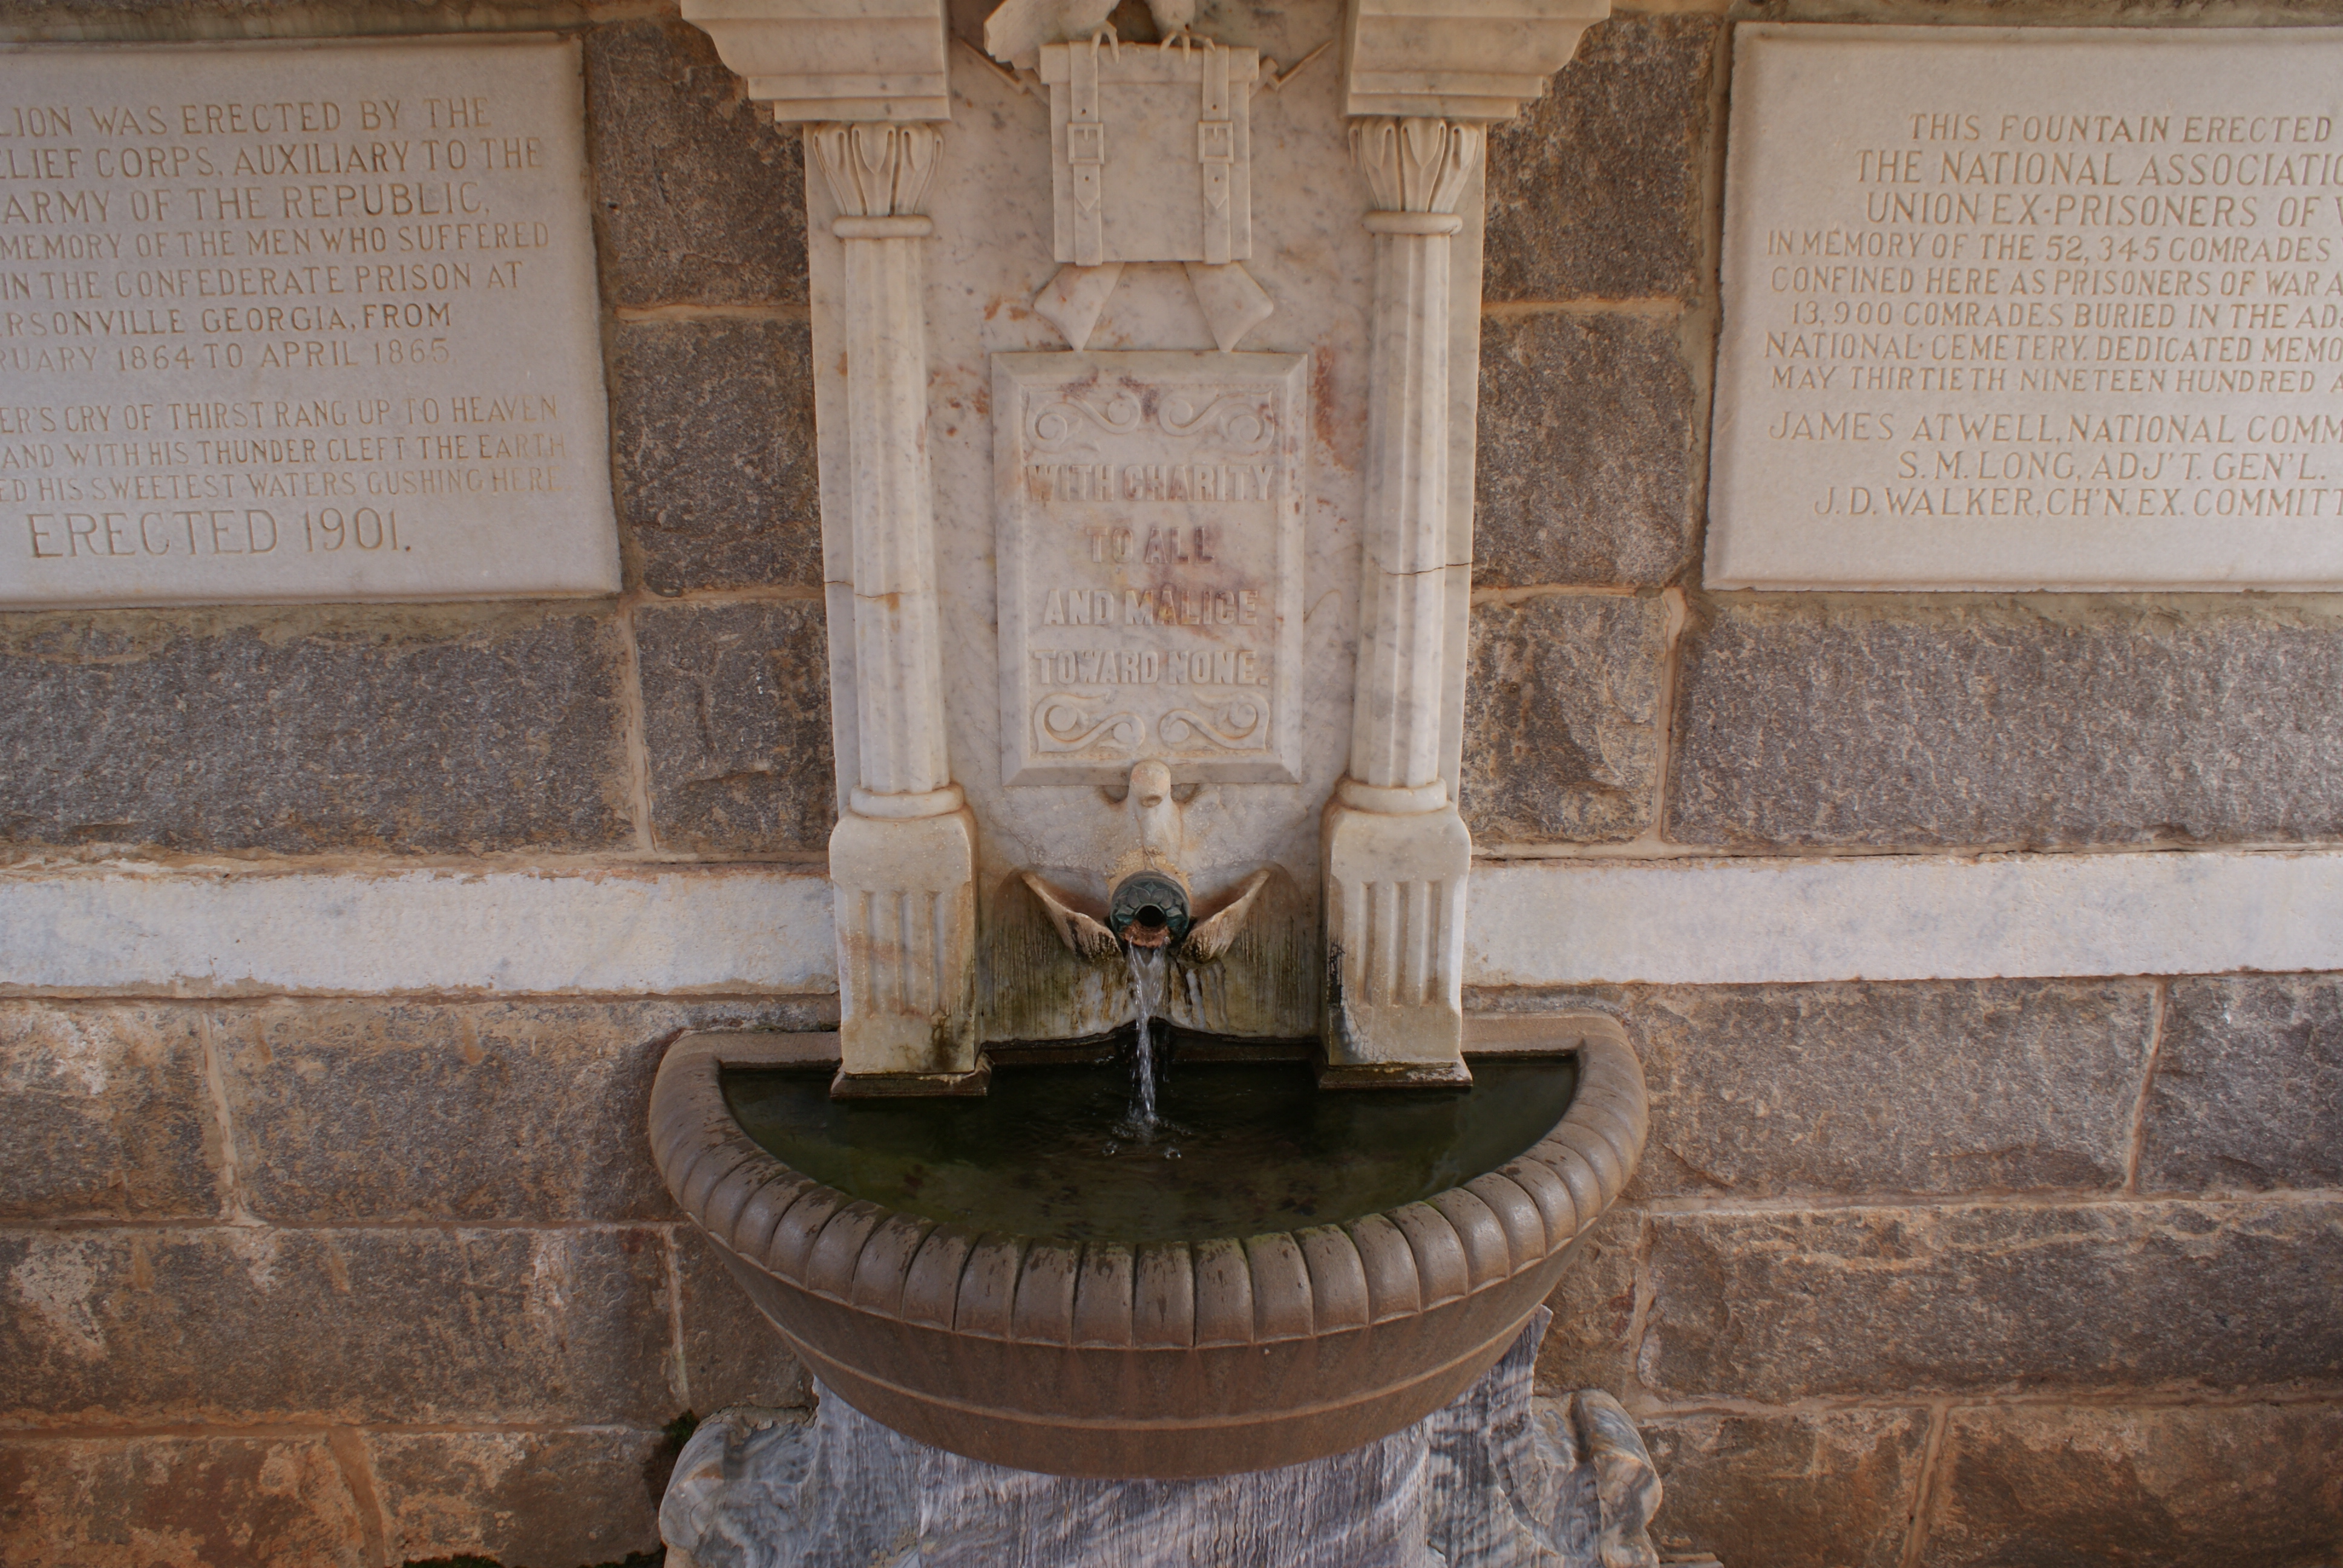 Fountain at Andersonville Prision